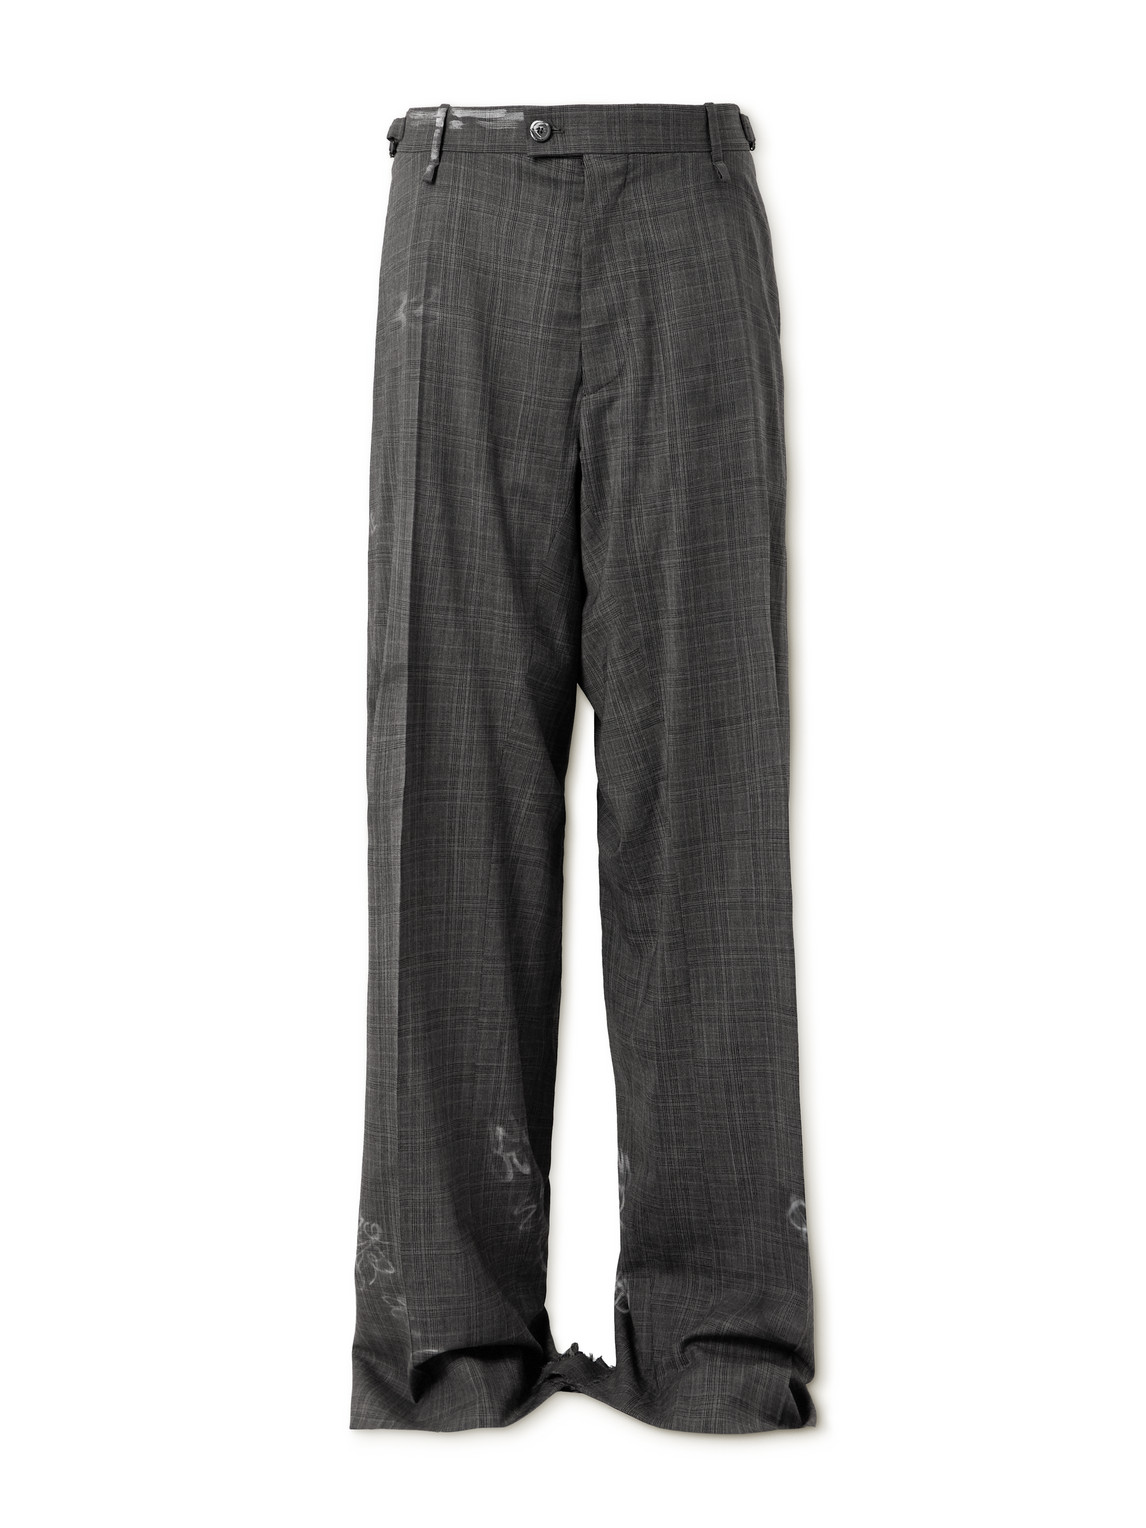 Skater Wide-Leg Printed Distressed Prince of Wales Checked Wool Trousers